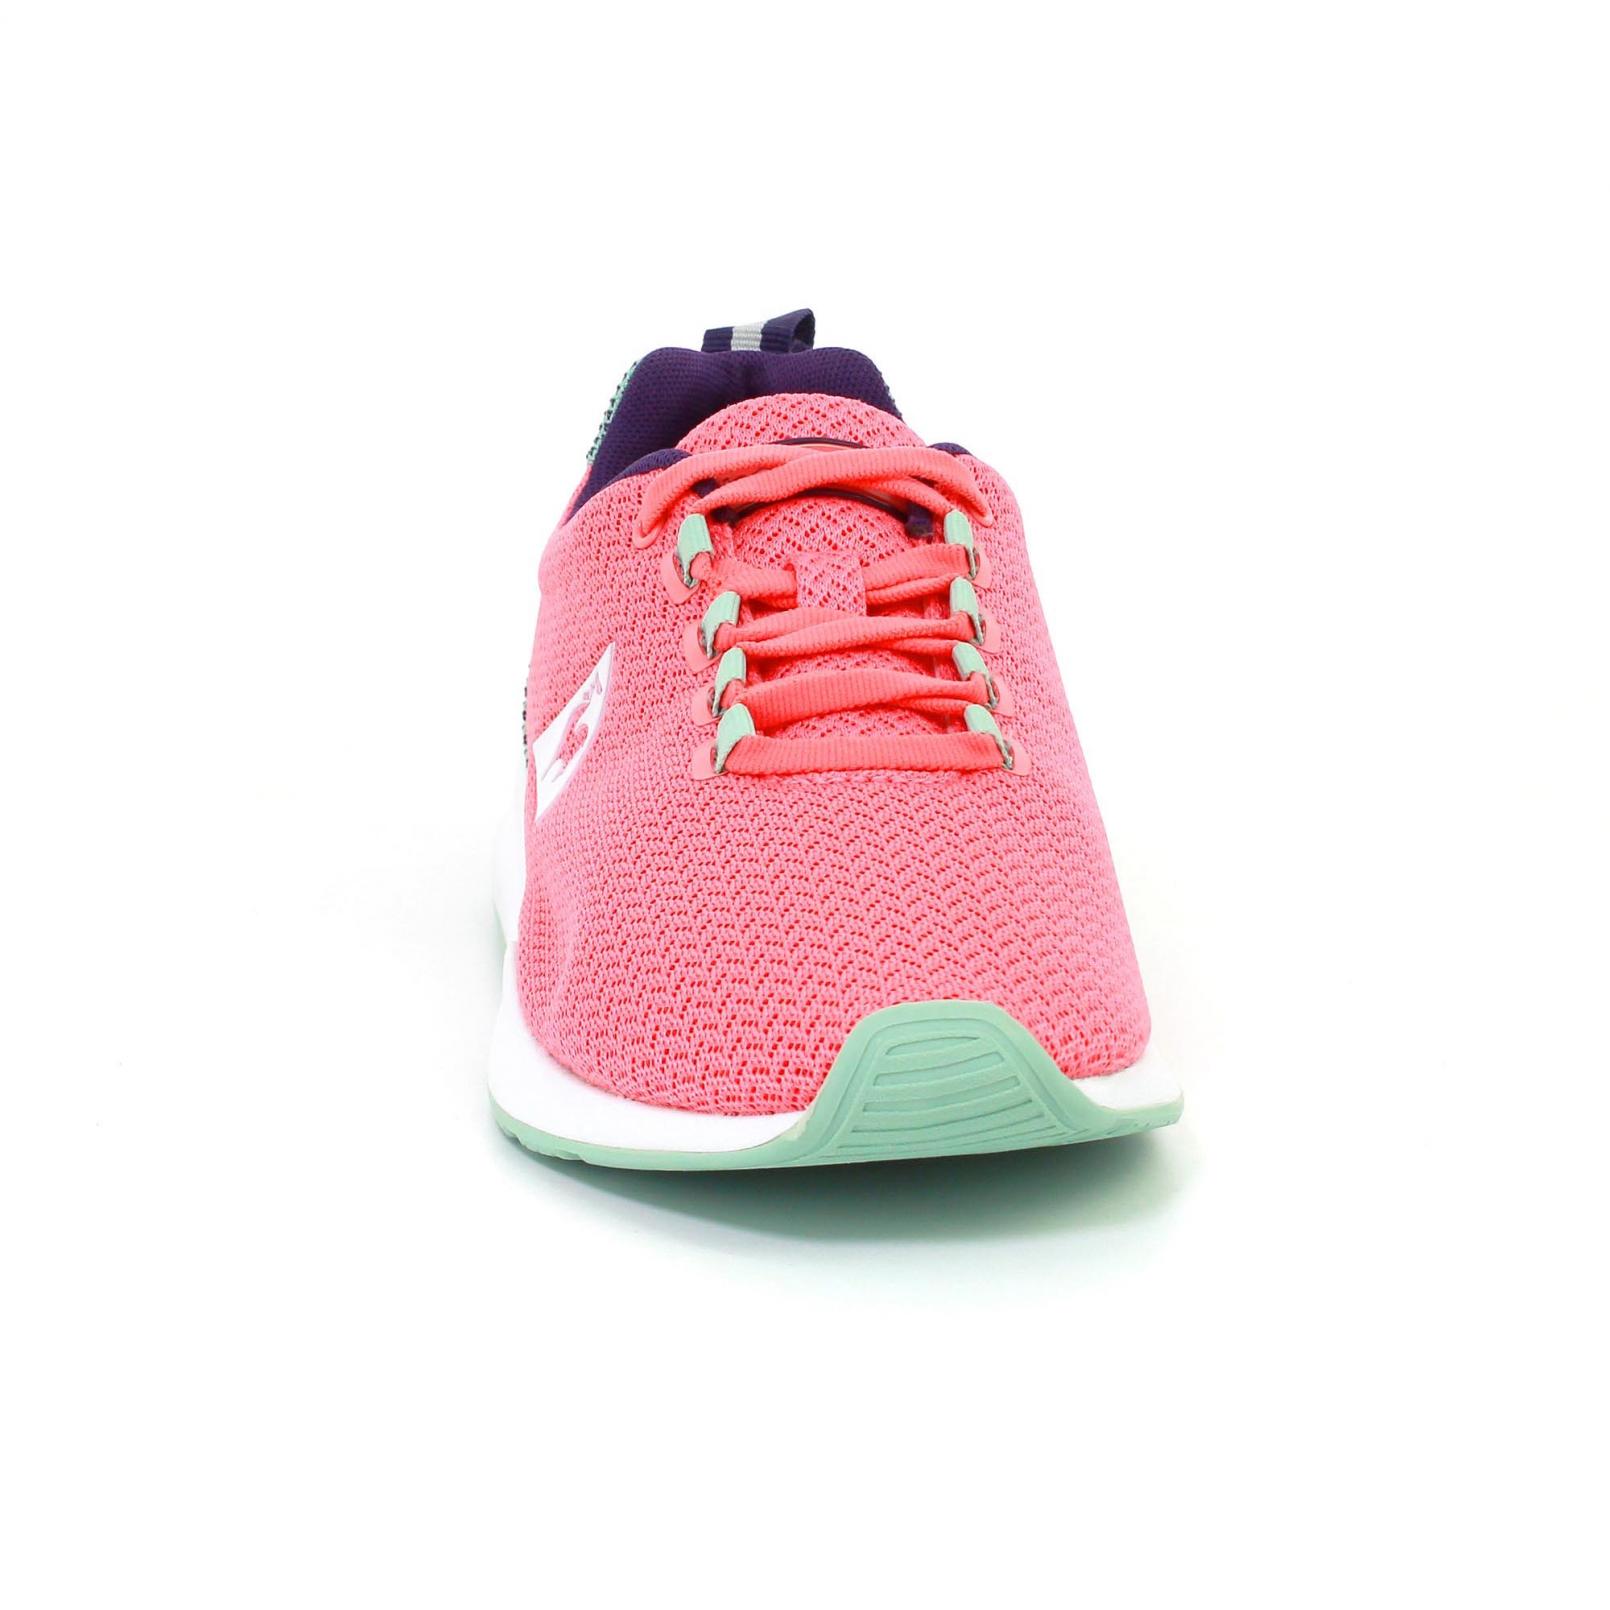 Shoes – Le Coq Sportif Techracer W Engineered Mesh Pink/Blue